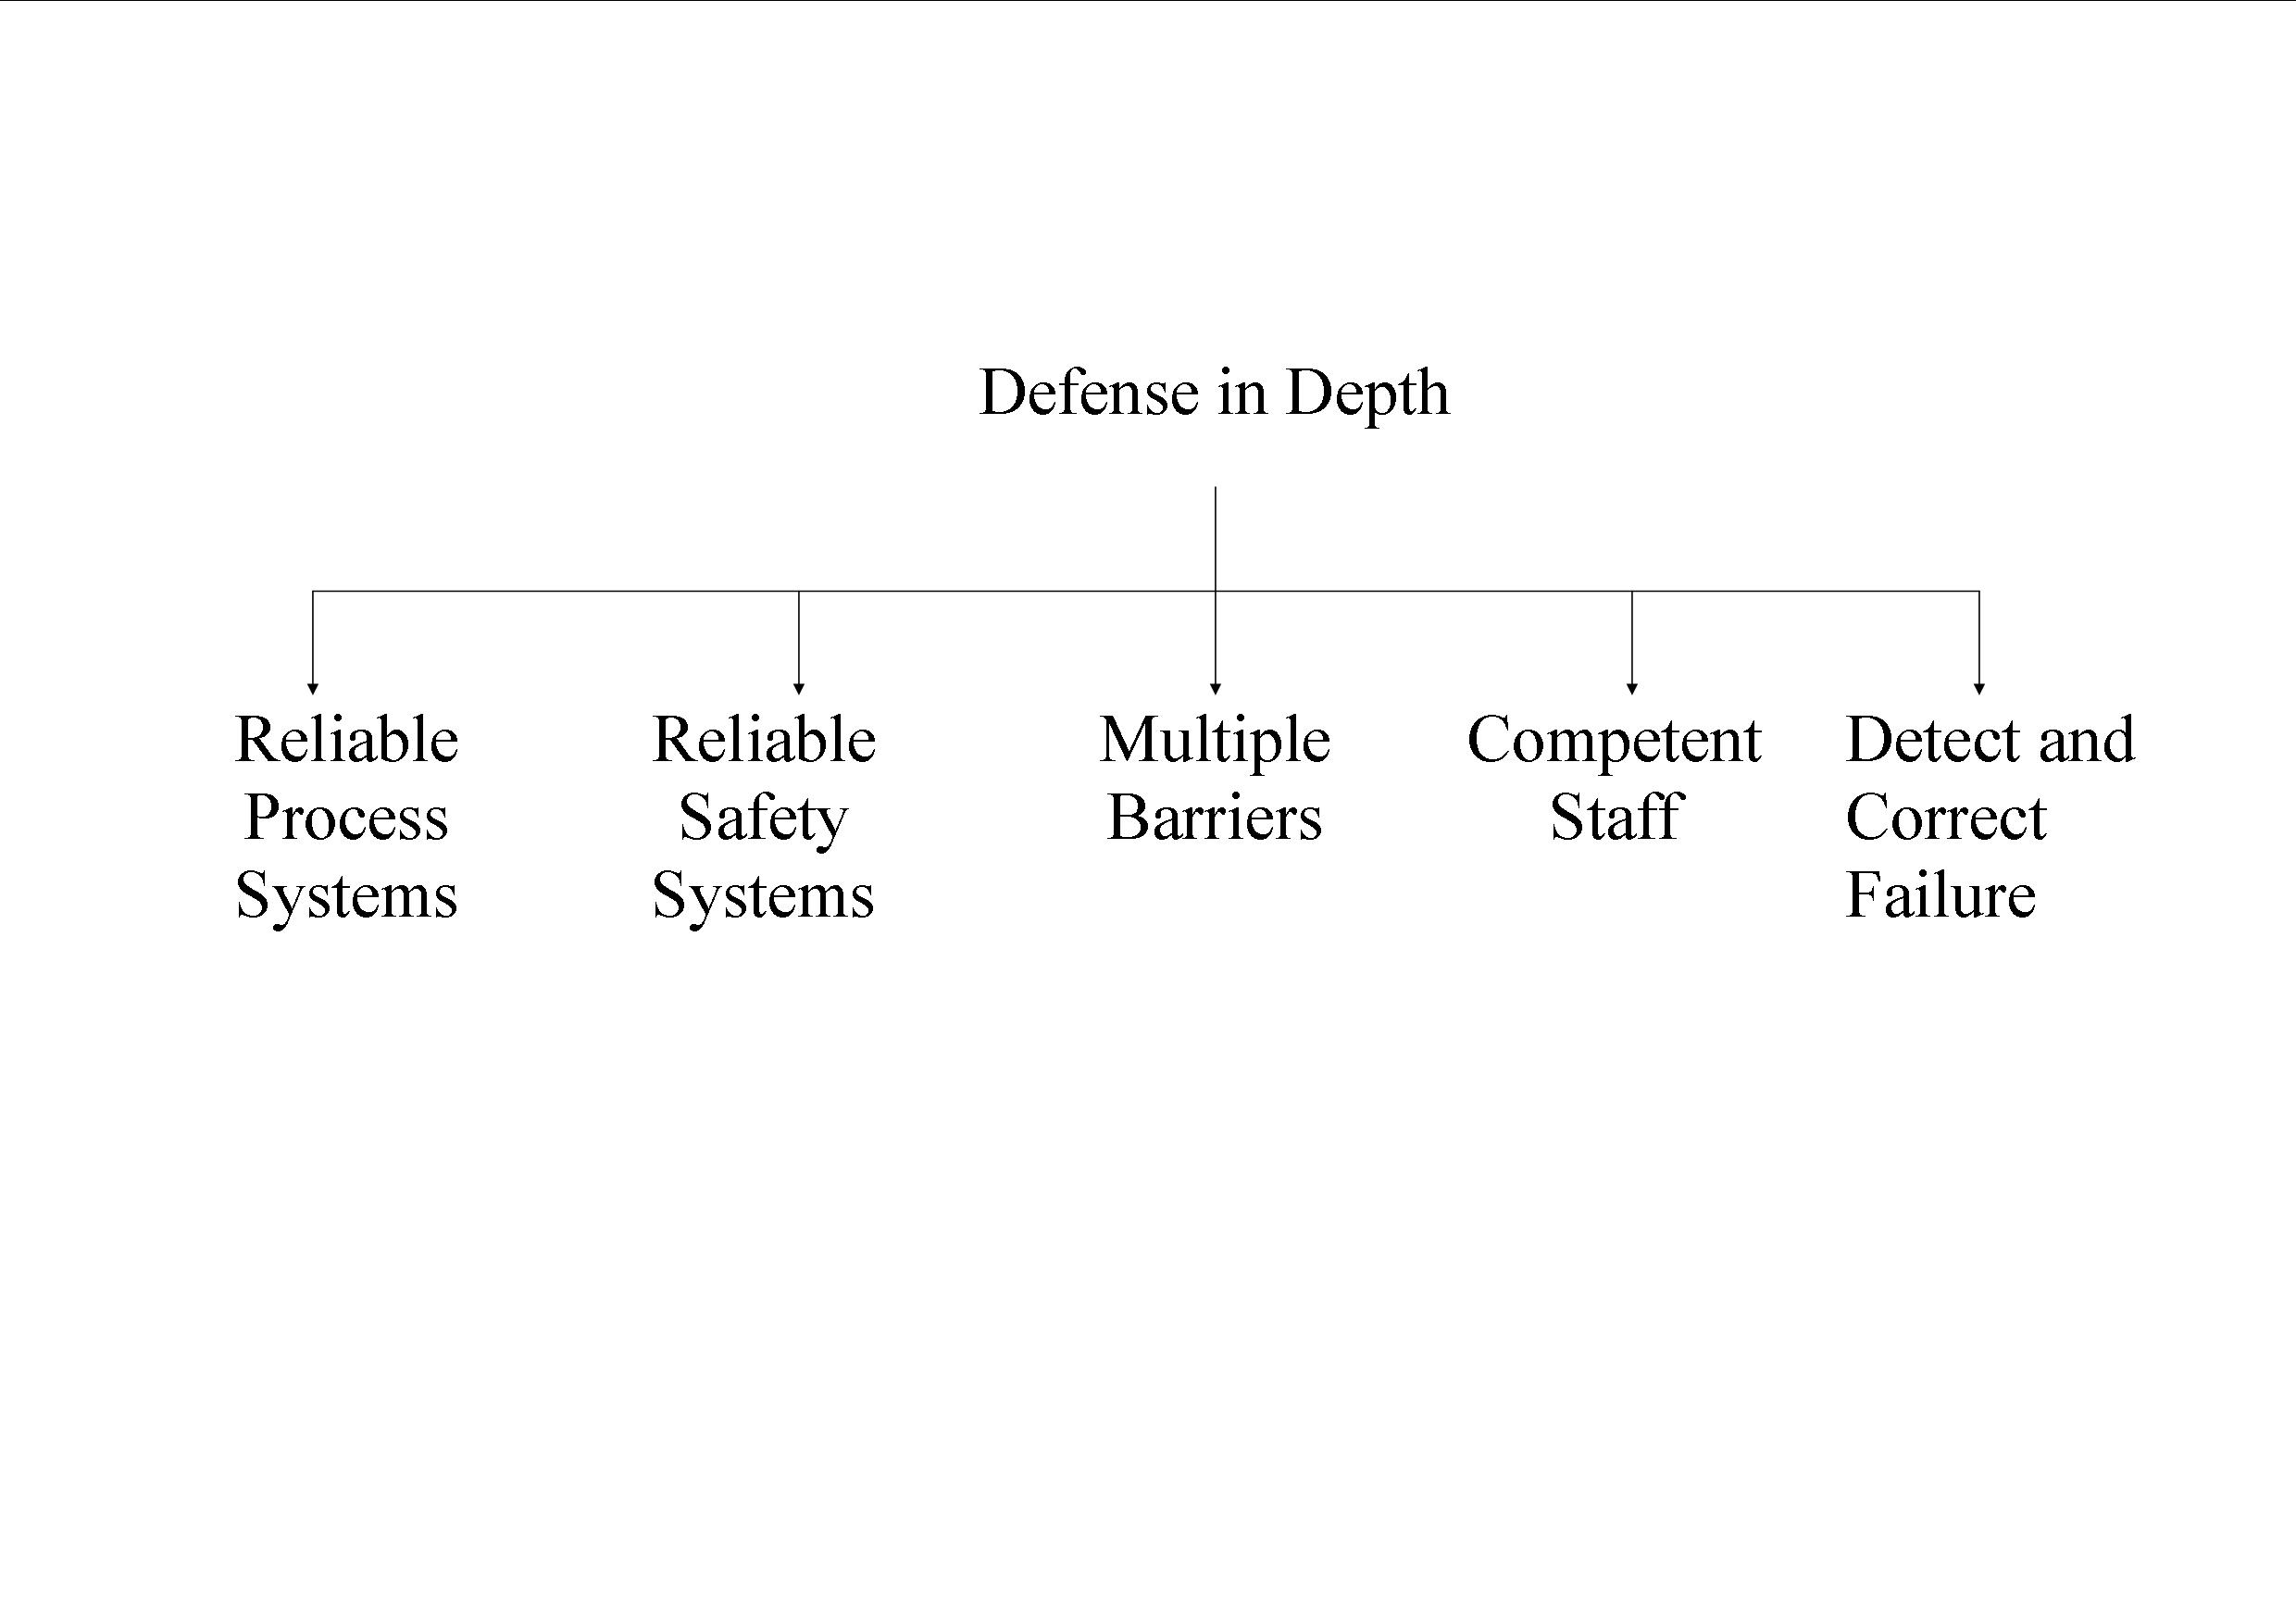 The defence-in-depth concept